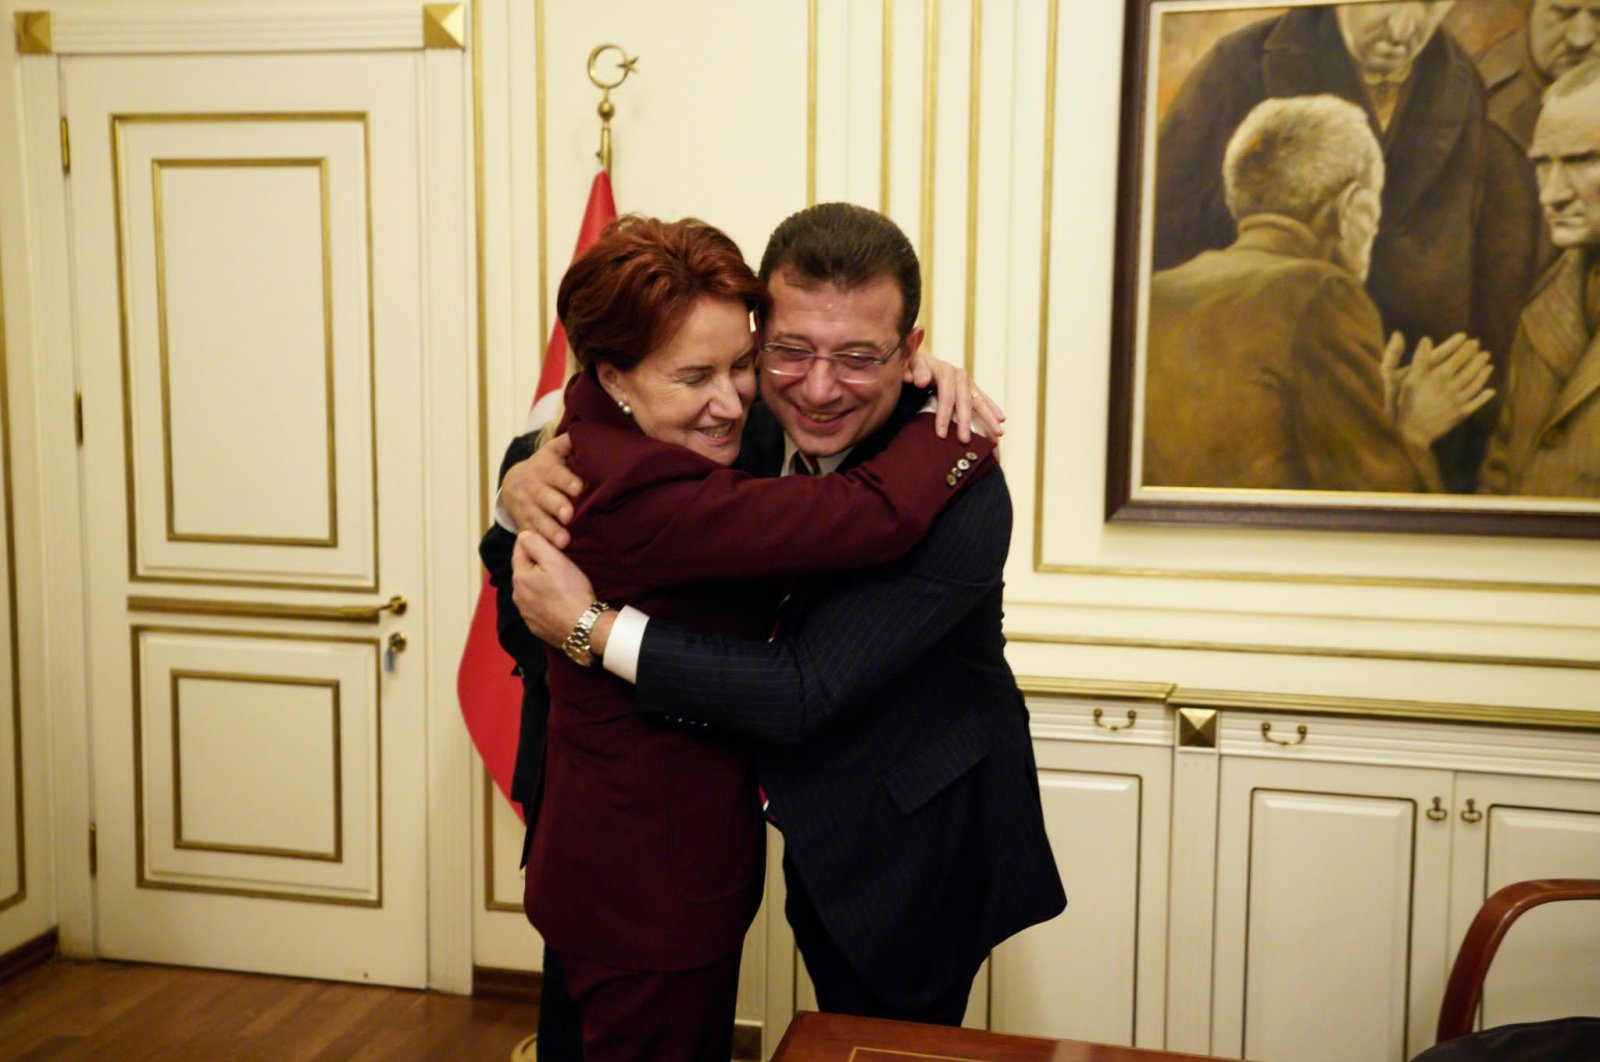 Good Party (IP) Chair Meral Akşener (L) embraces Istanbul Mayor Ekrem Imamoğlu after the latter is convicted of insulting a public official at the mayoral building in Istanbul, Türkiye, Dec. 15, 2022. (DHA Photo)